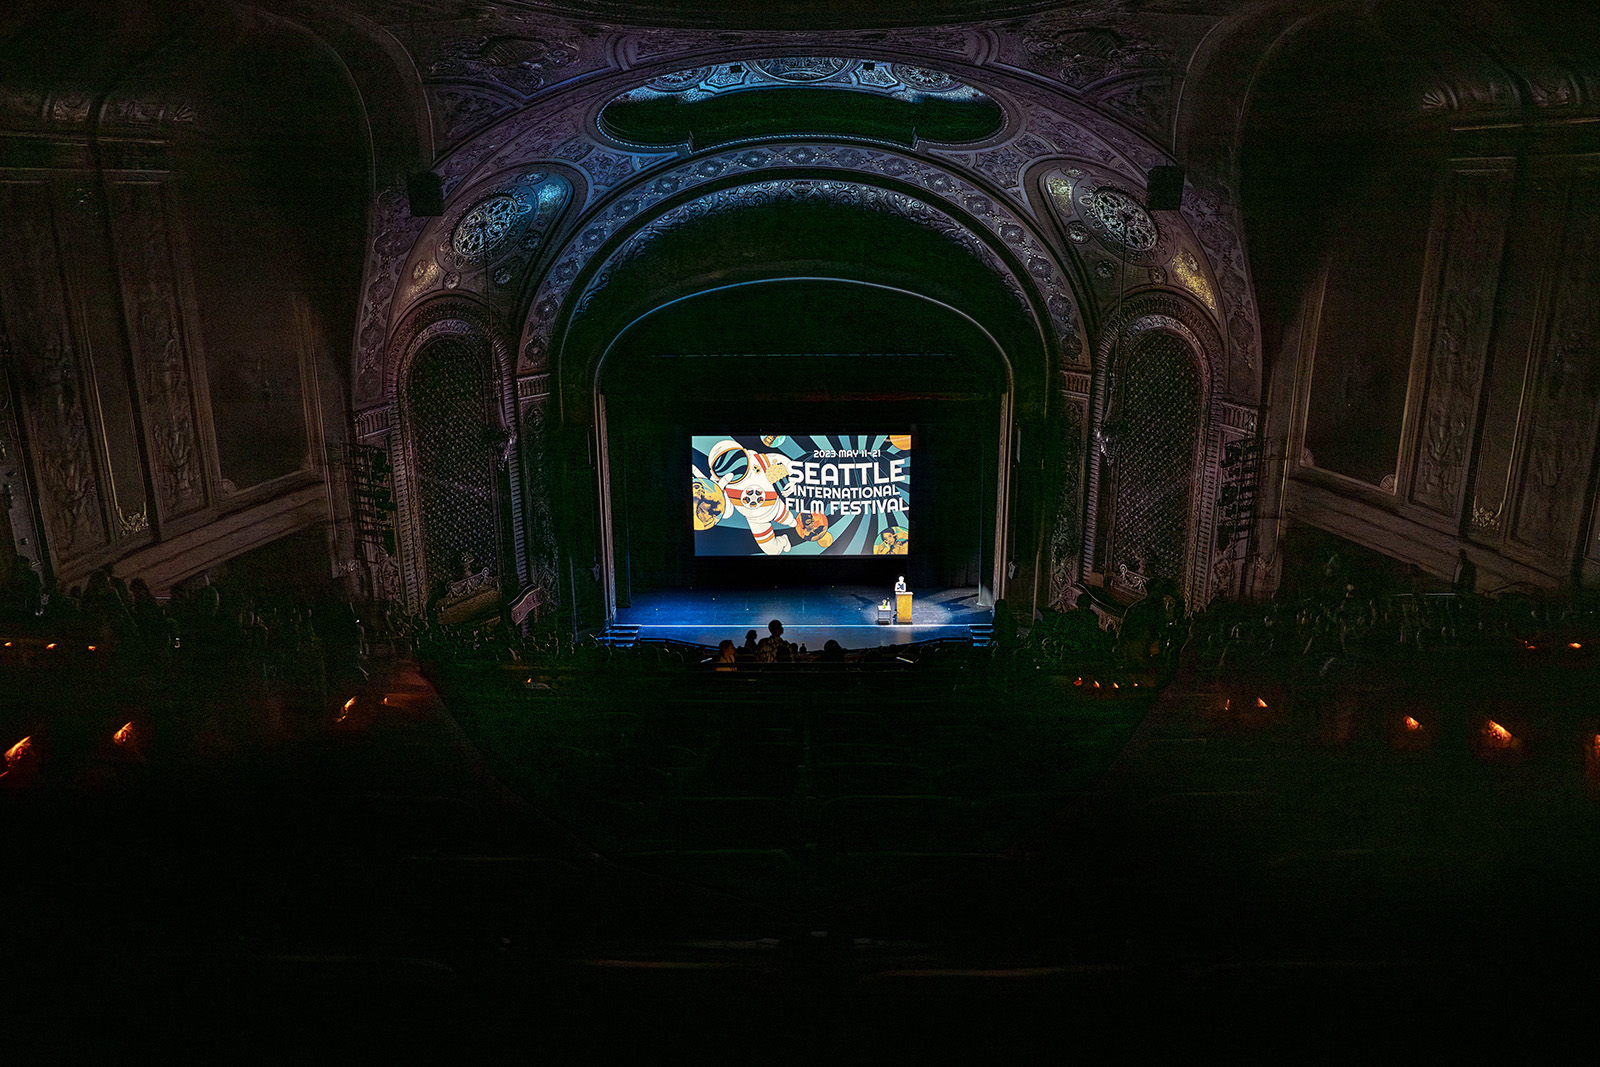 The grand view of Opening Night from the Paramount Theatre balcony